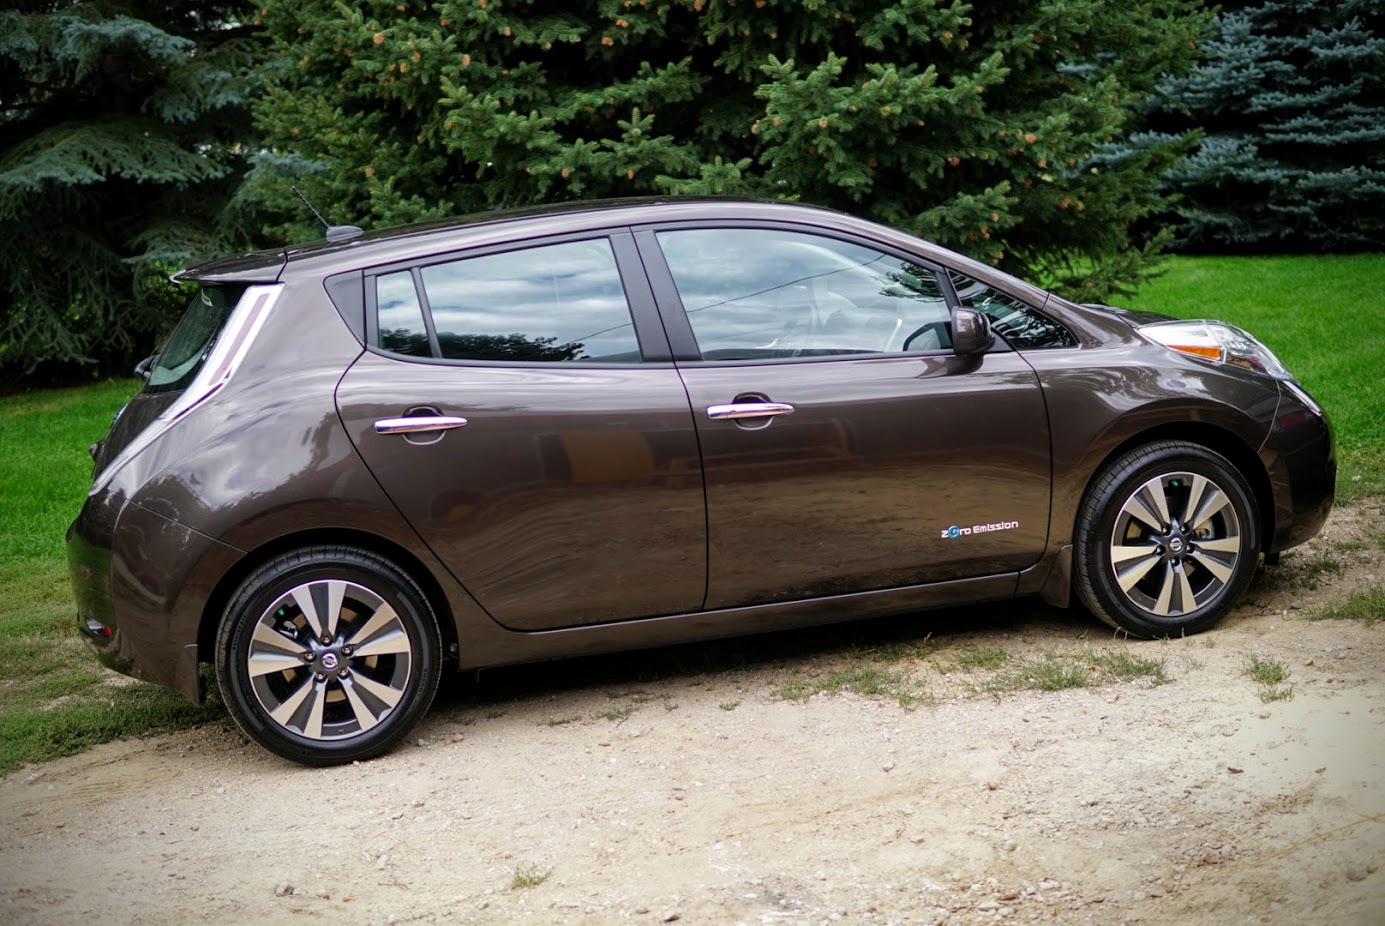 The Nissan Leaf Experiment